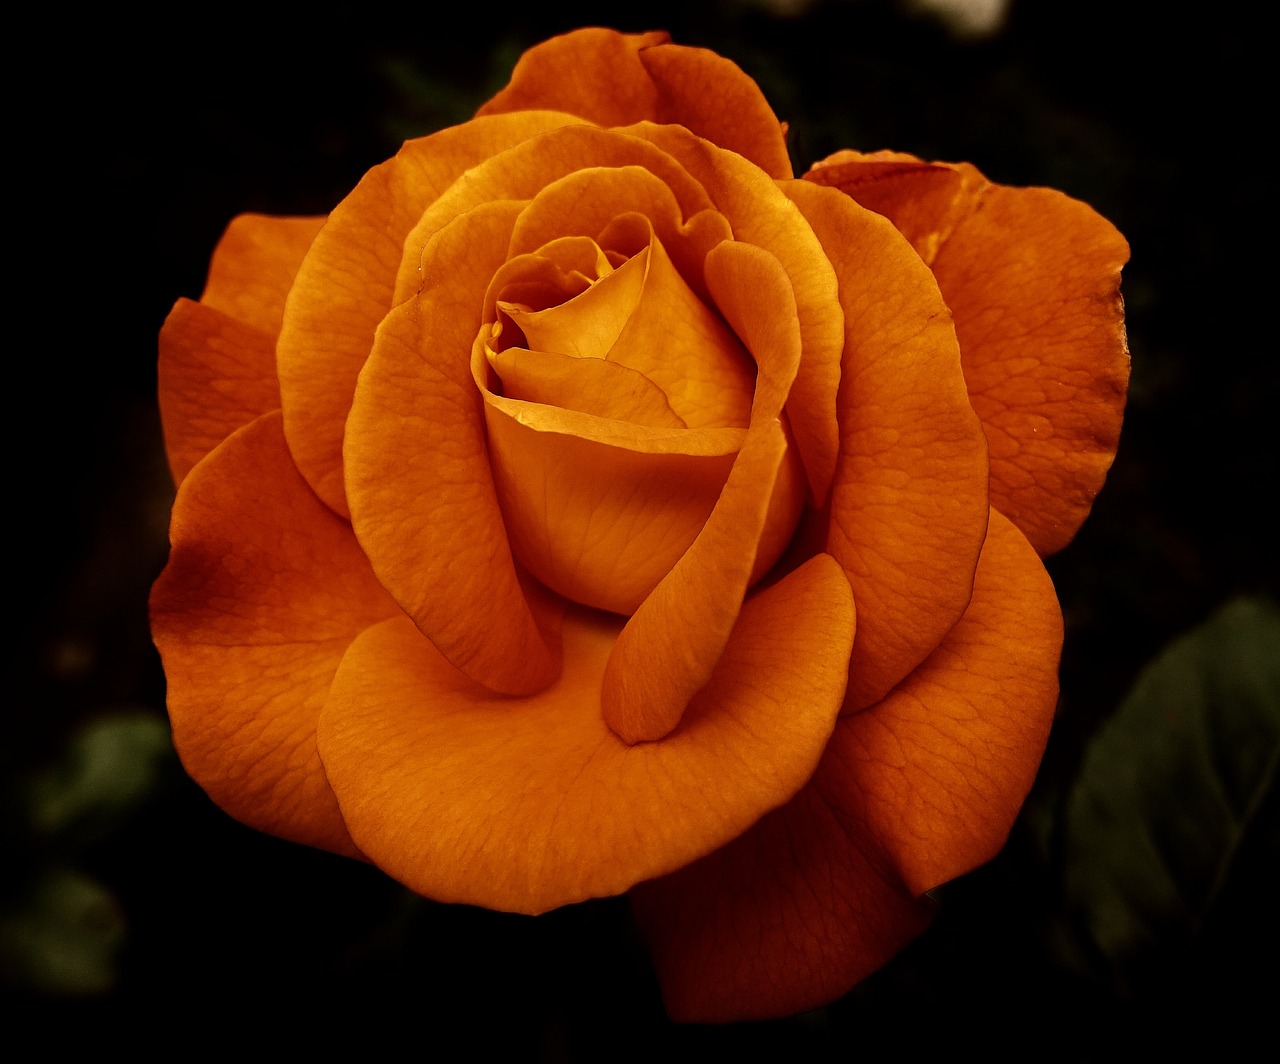 a close up of an orange rose on a black background, detailed realistic colors, 35 mm product photo”